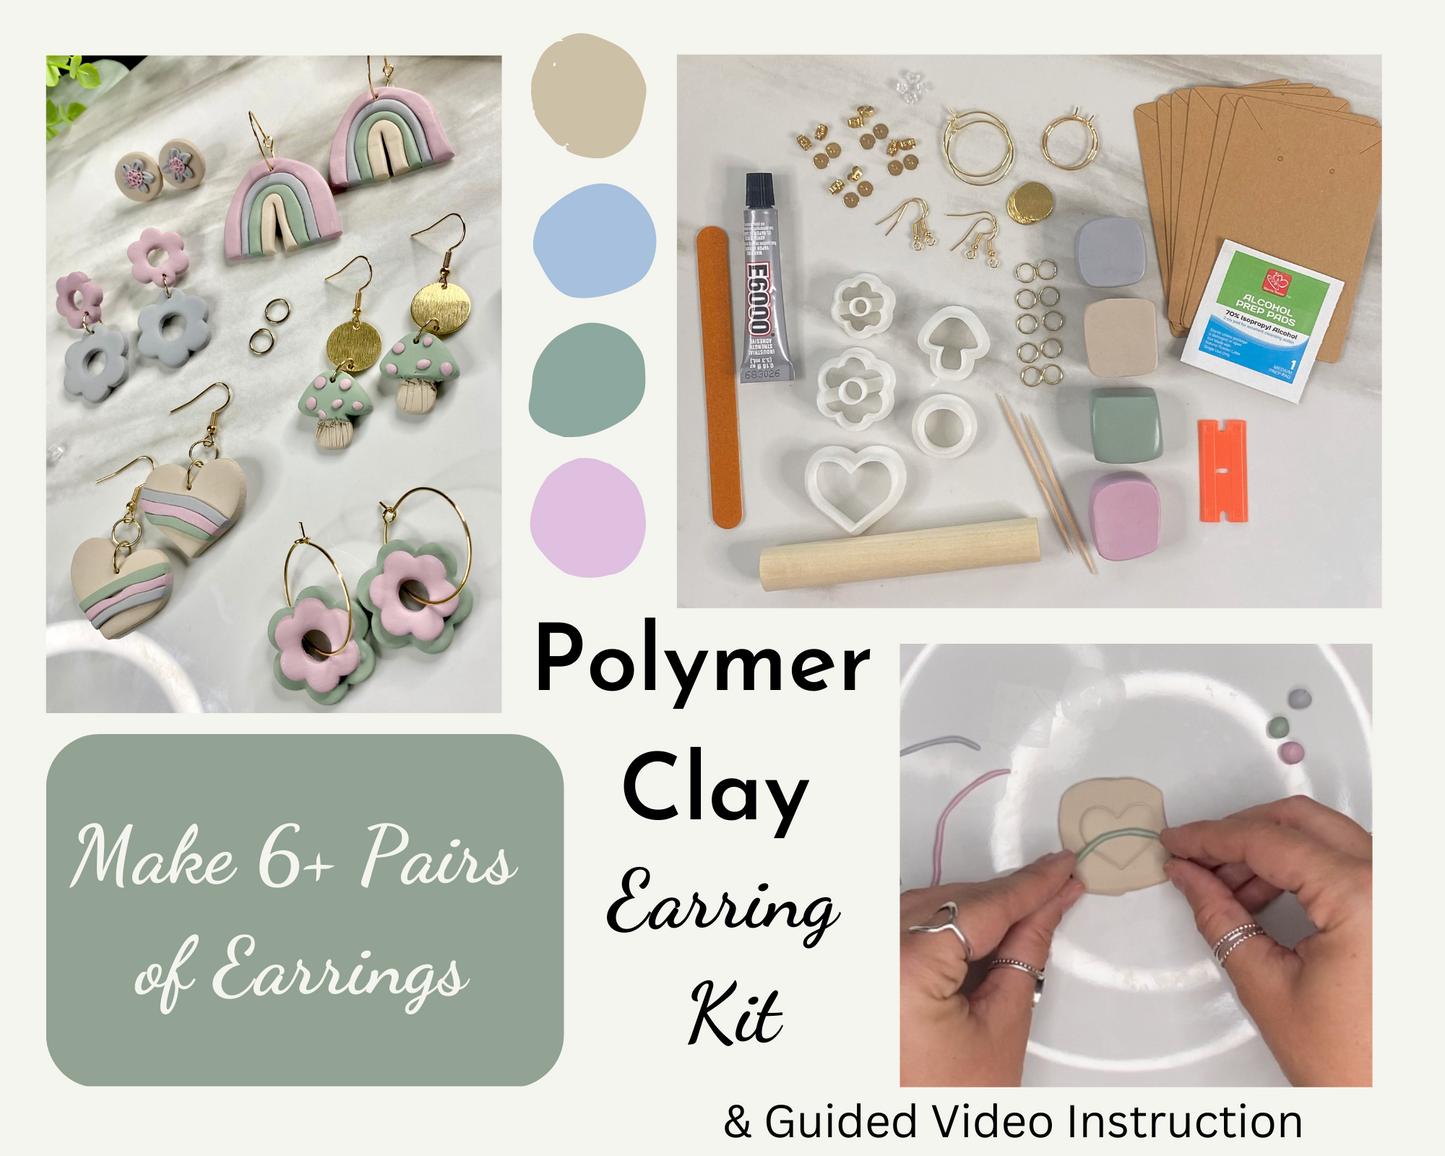 DIY Polymer Clay Earring Kit - SPRING RETRO BOX - Makes 6 sets of Earrings- Guided Video Tutorial